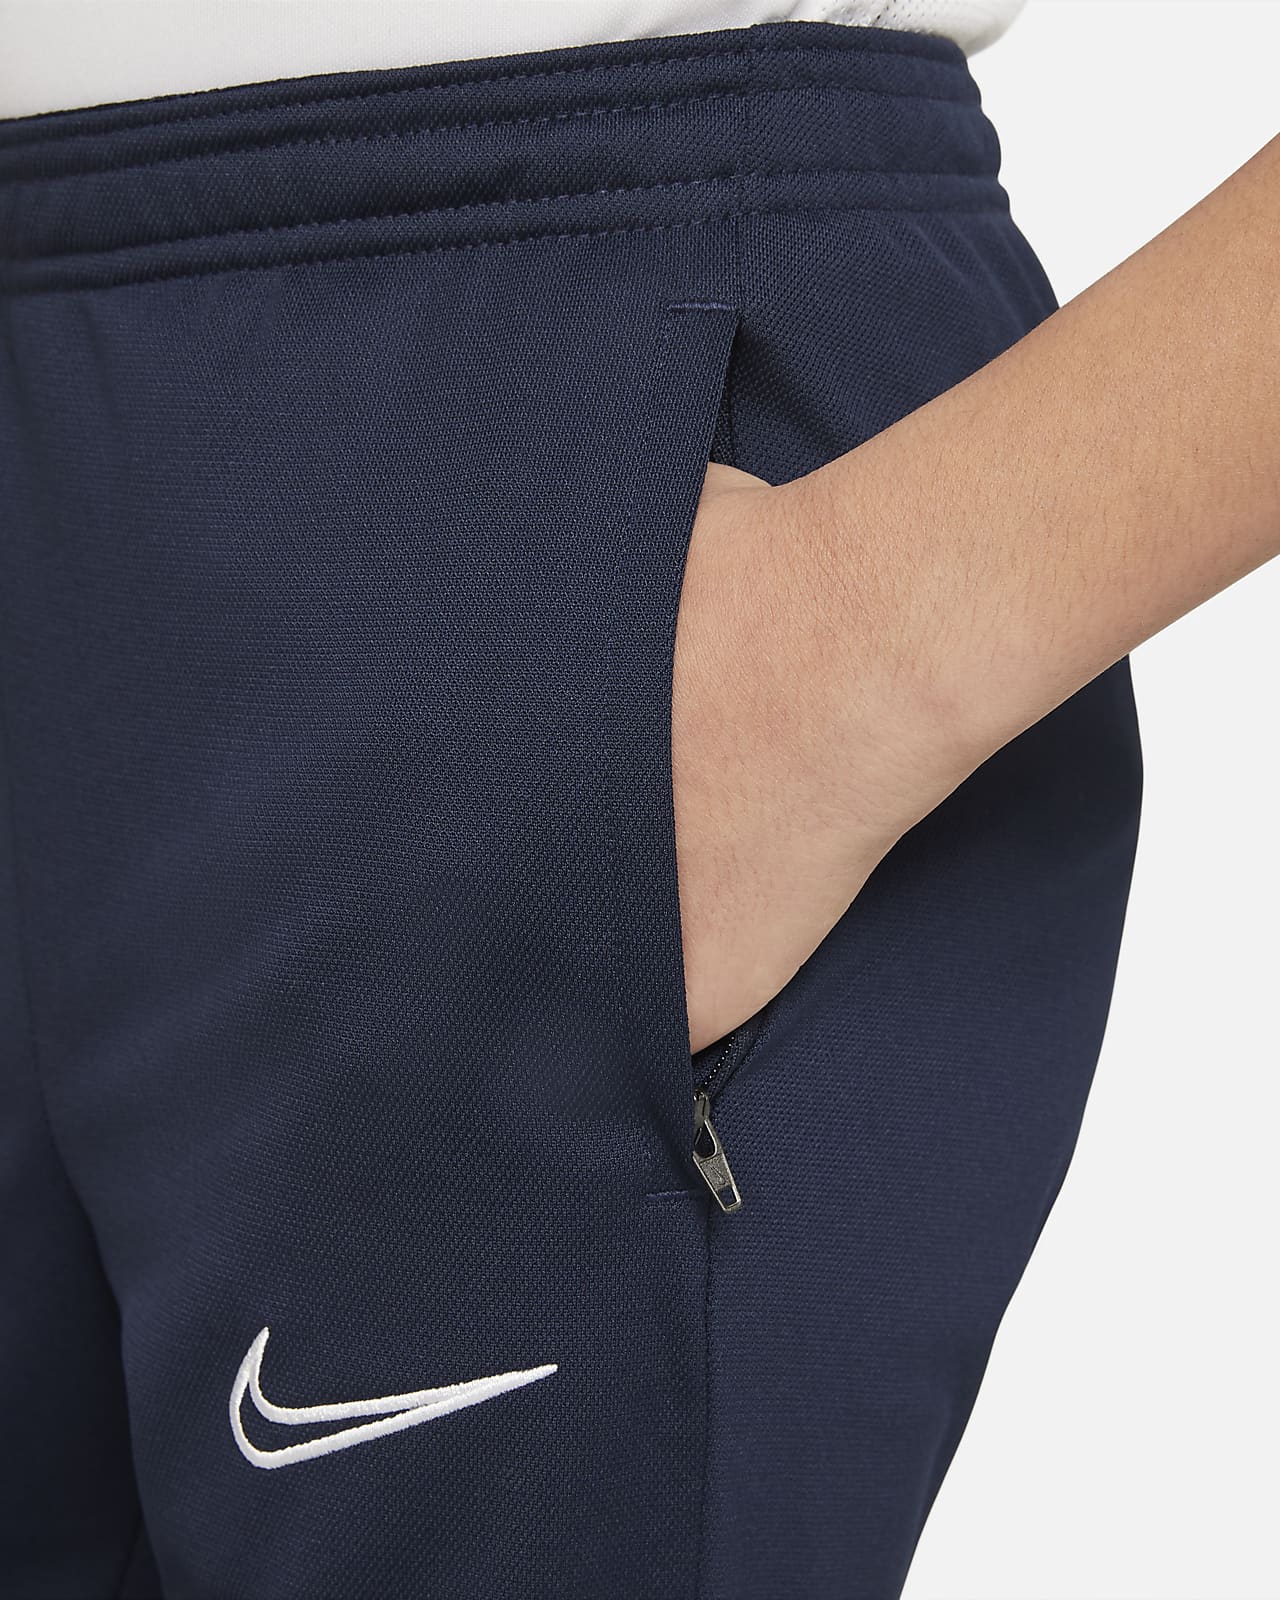 Appointment autobiography South Nike Dri-FIT Academy Older Kids' Knit Football Tracksuit. Nike SA